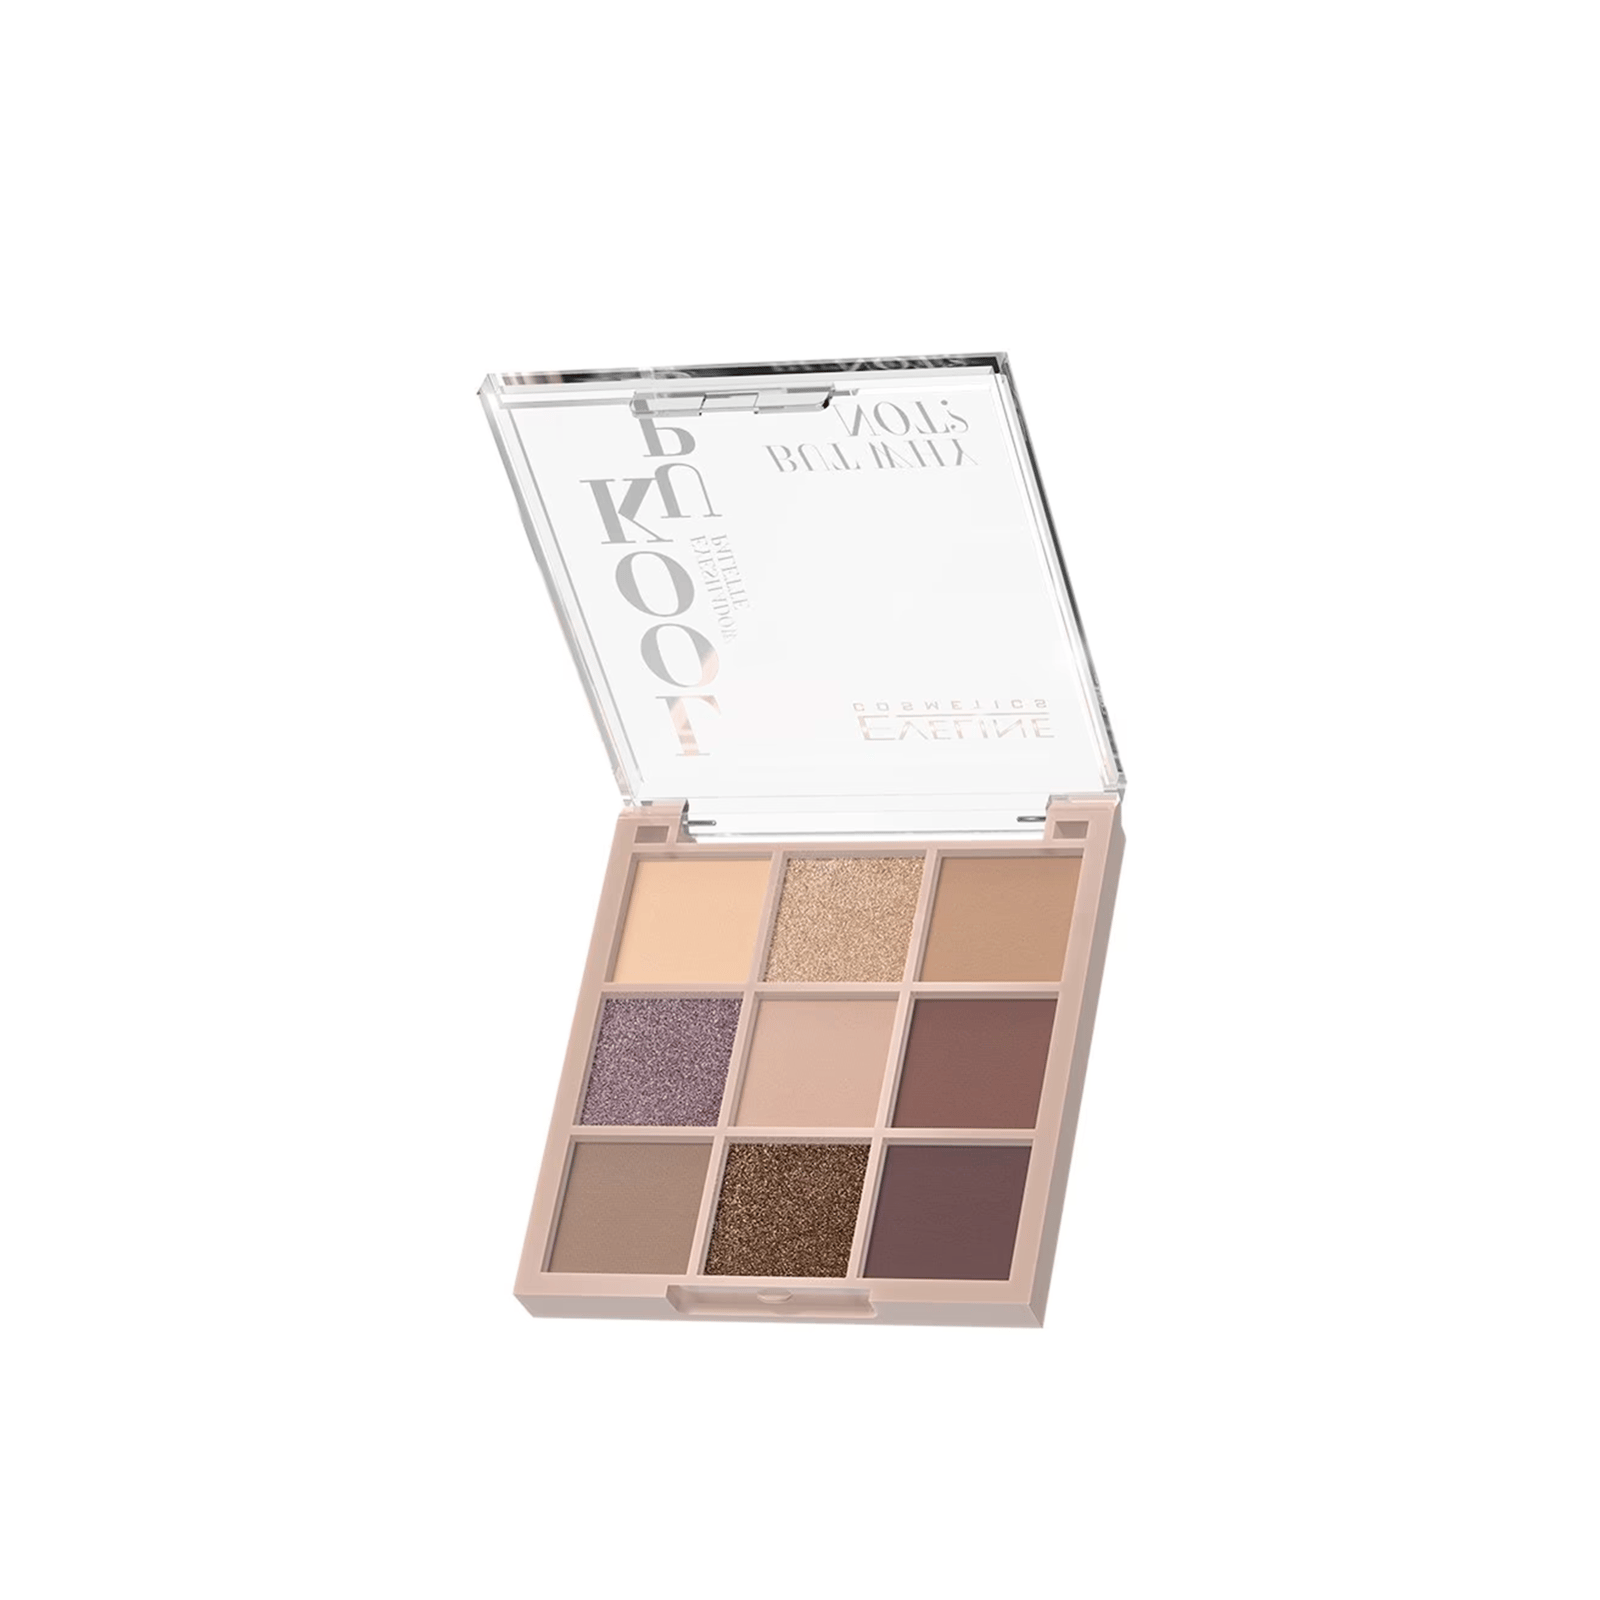 Eveline Cosmetics Look Up Eyeshadow Palette But Why Not? 10.8g (0.38 oz)